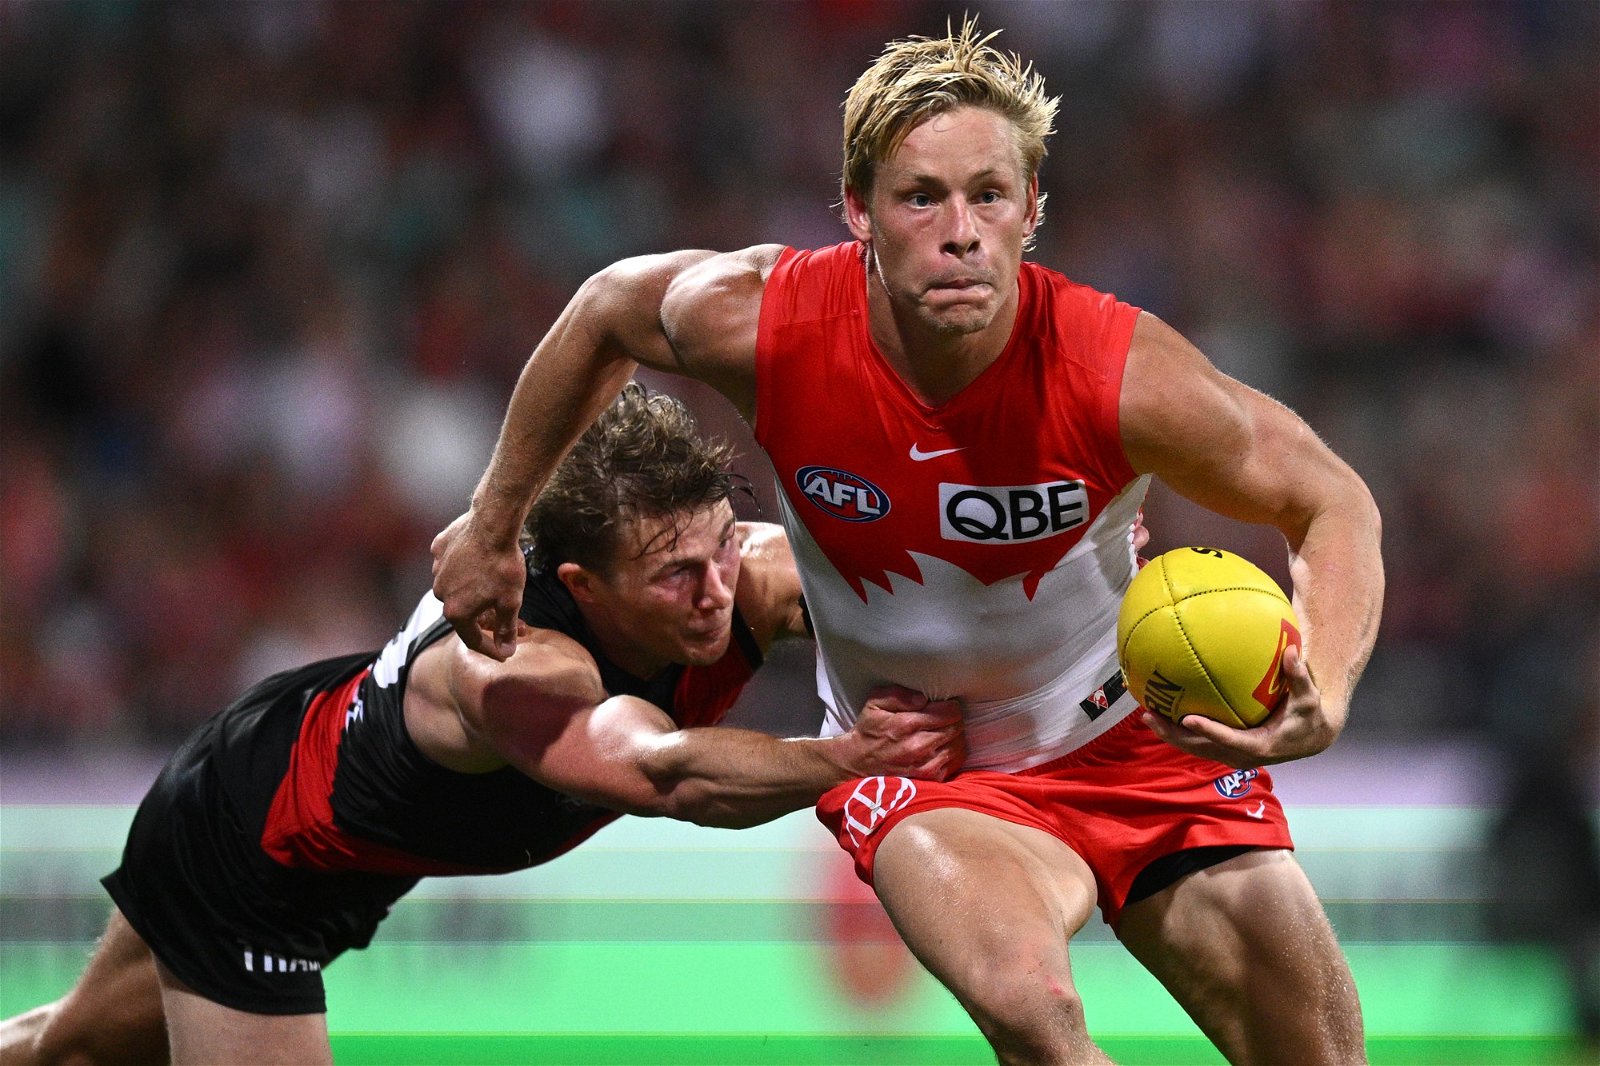 Isaac Heeney with the ball